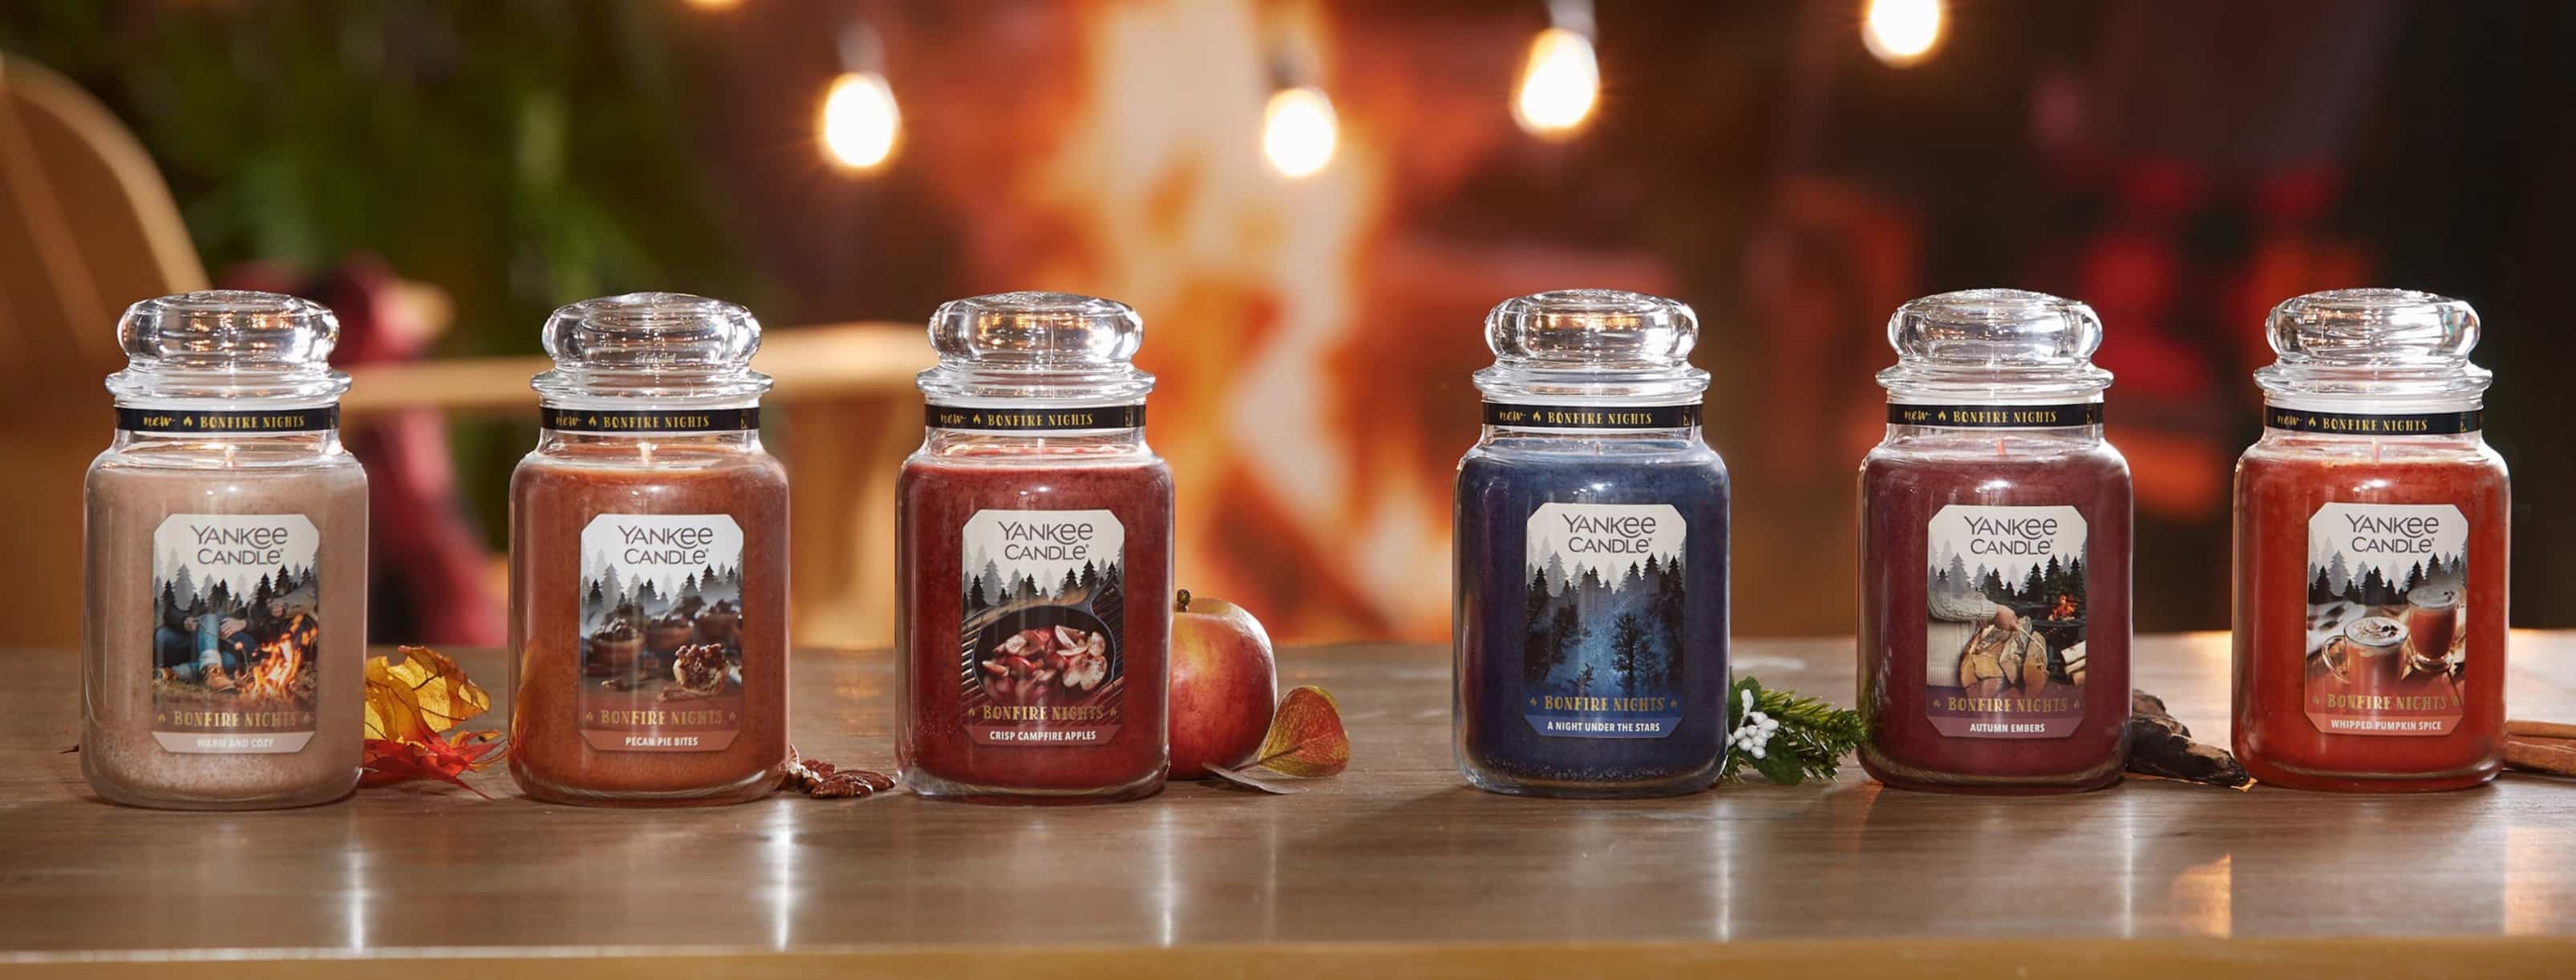 christmas-candles-yankee-candle_1